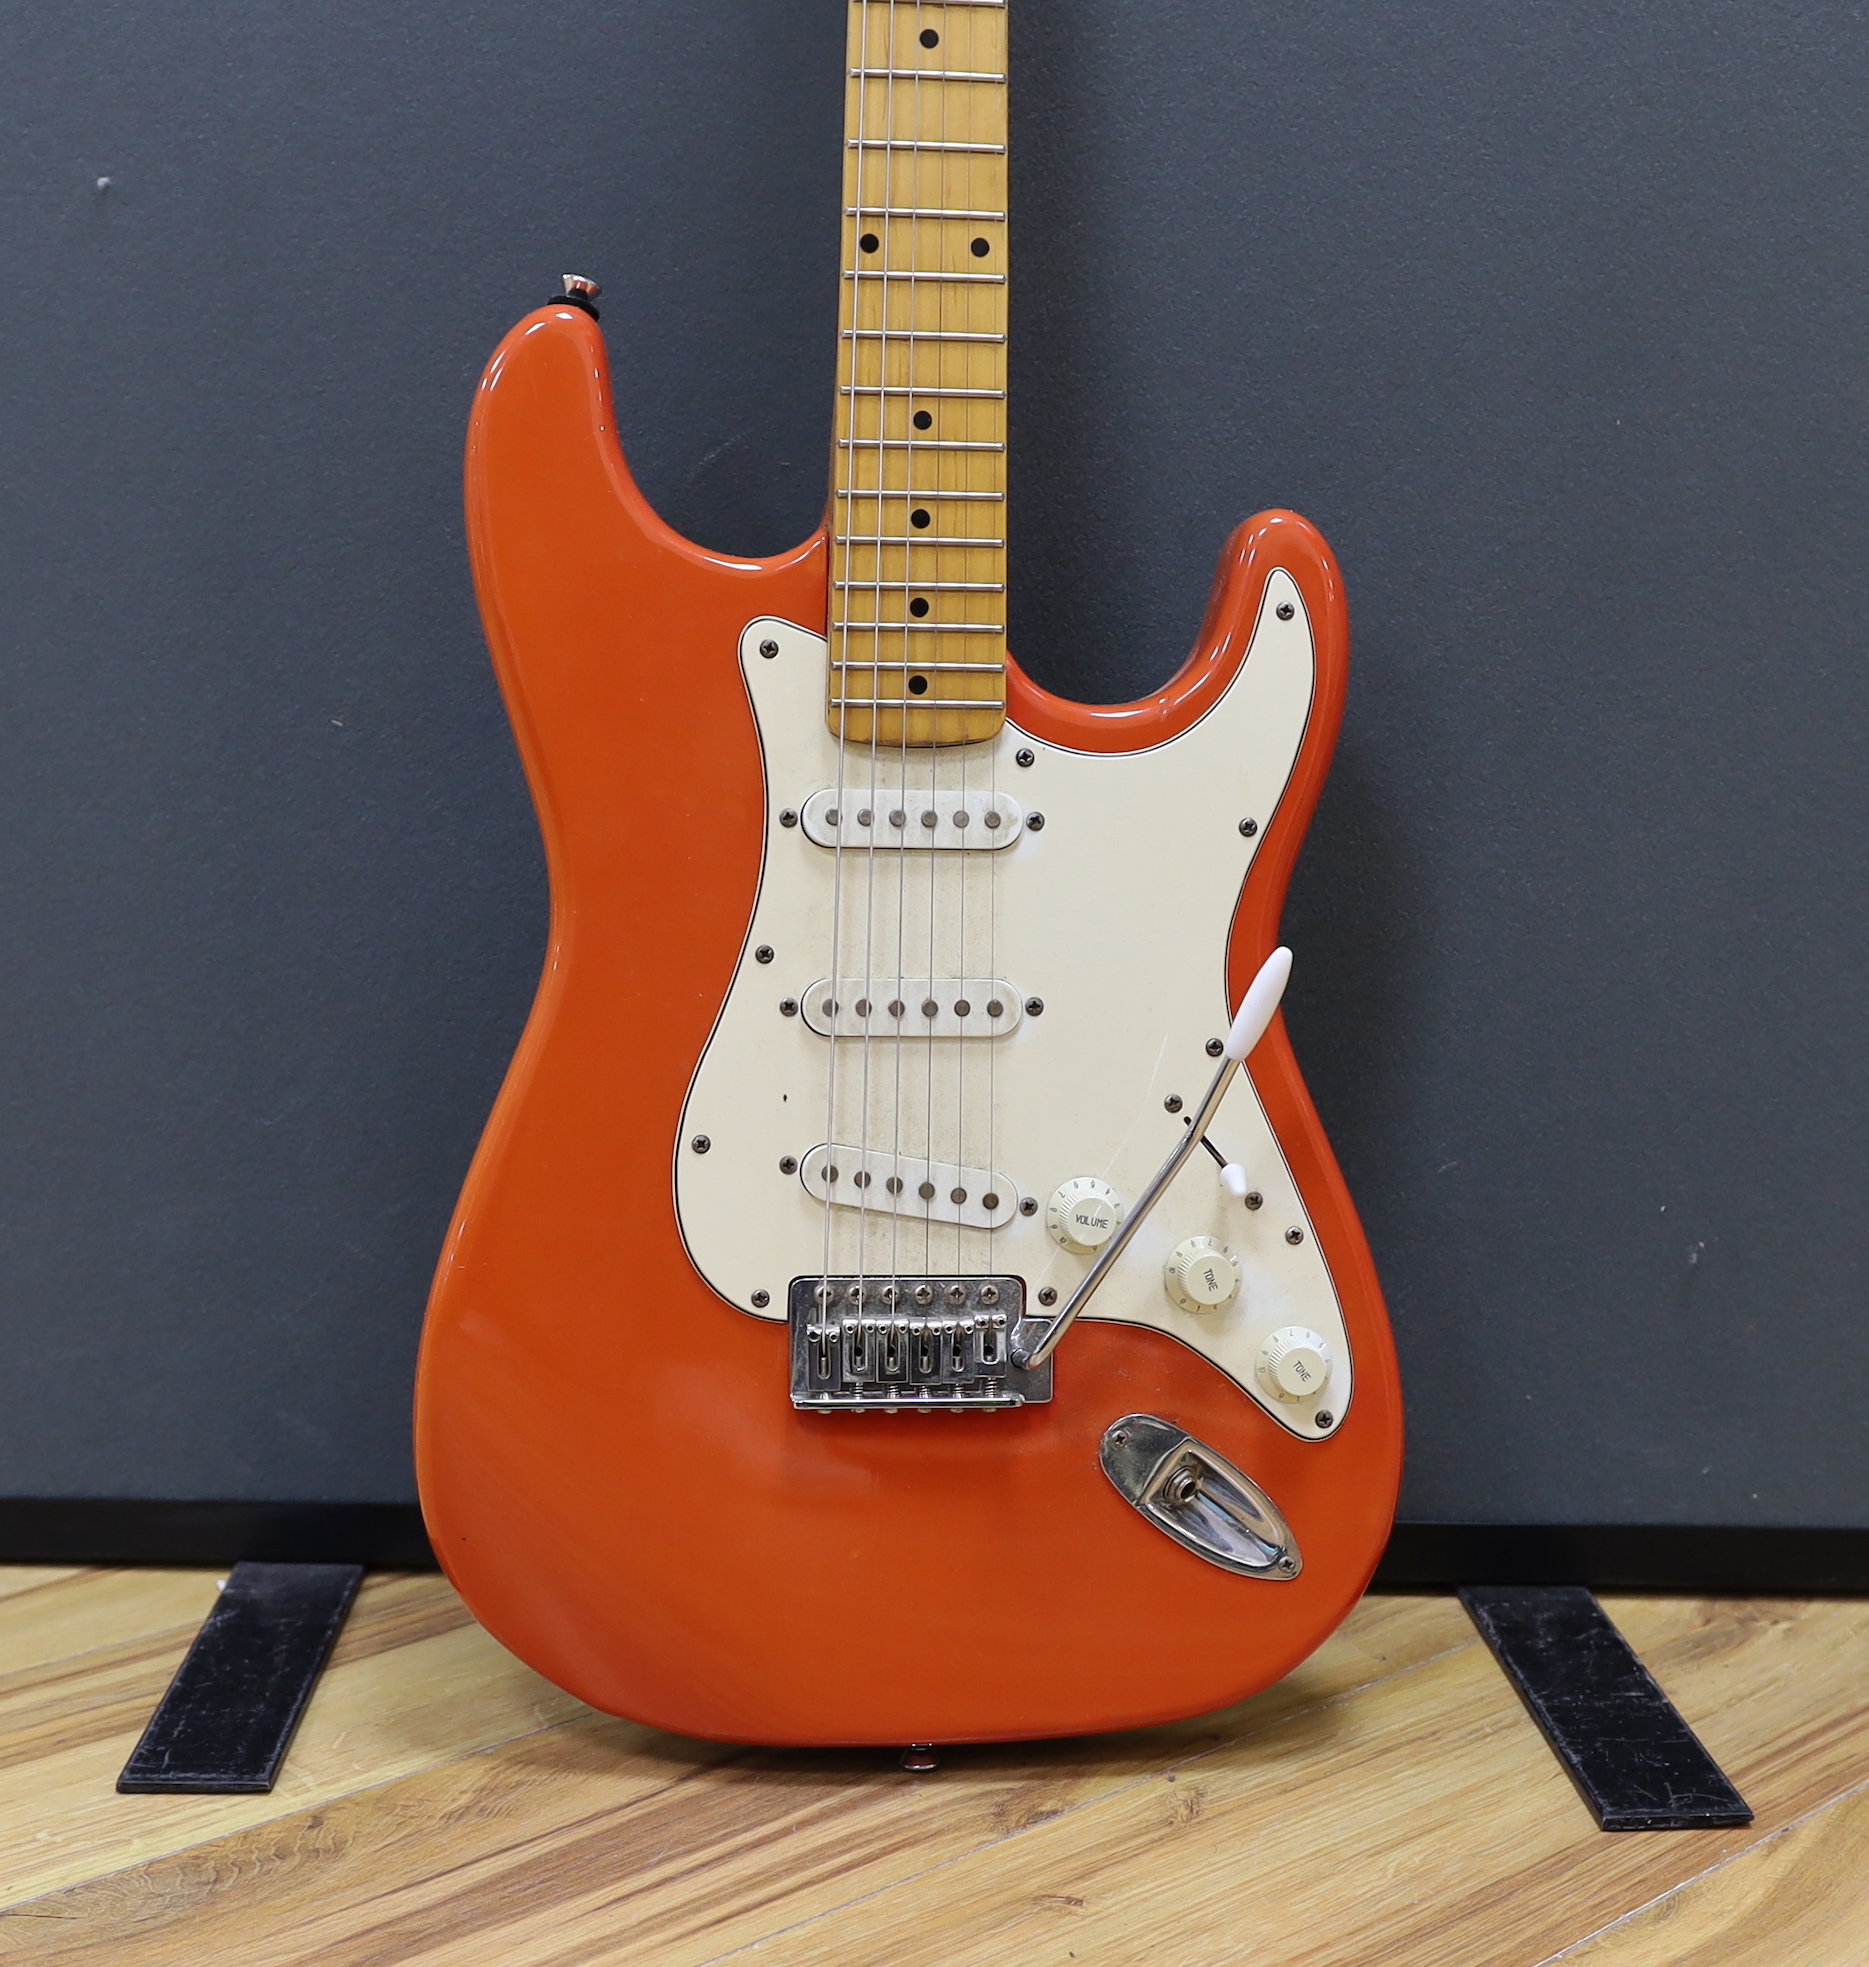 A JCX Stargazer electric guitar with maple neck and orange lacquered body